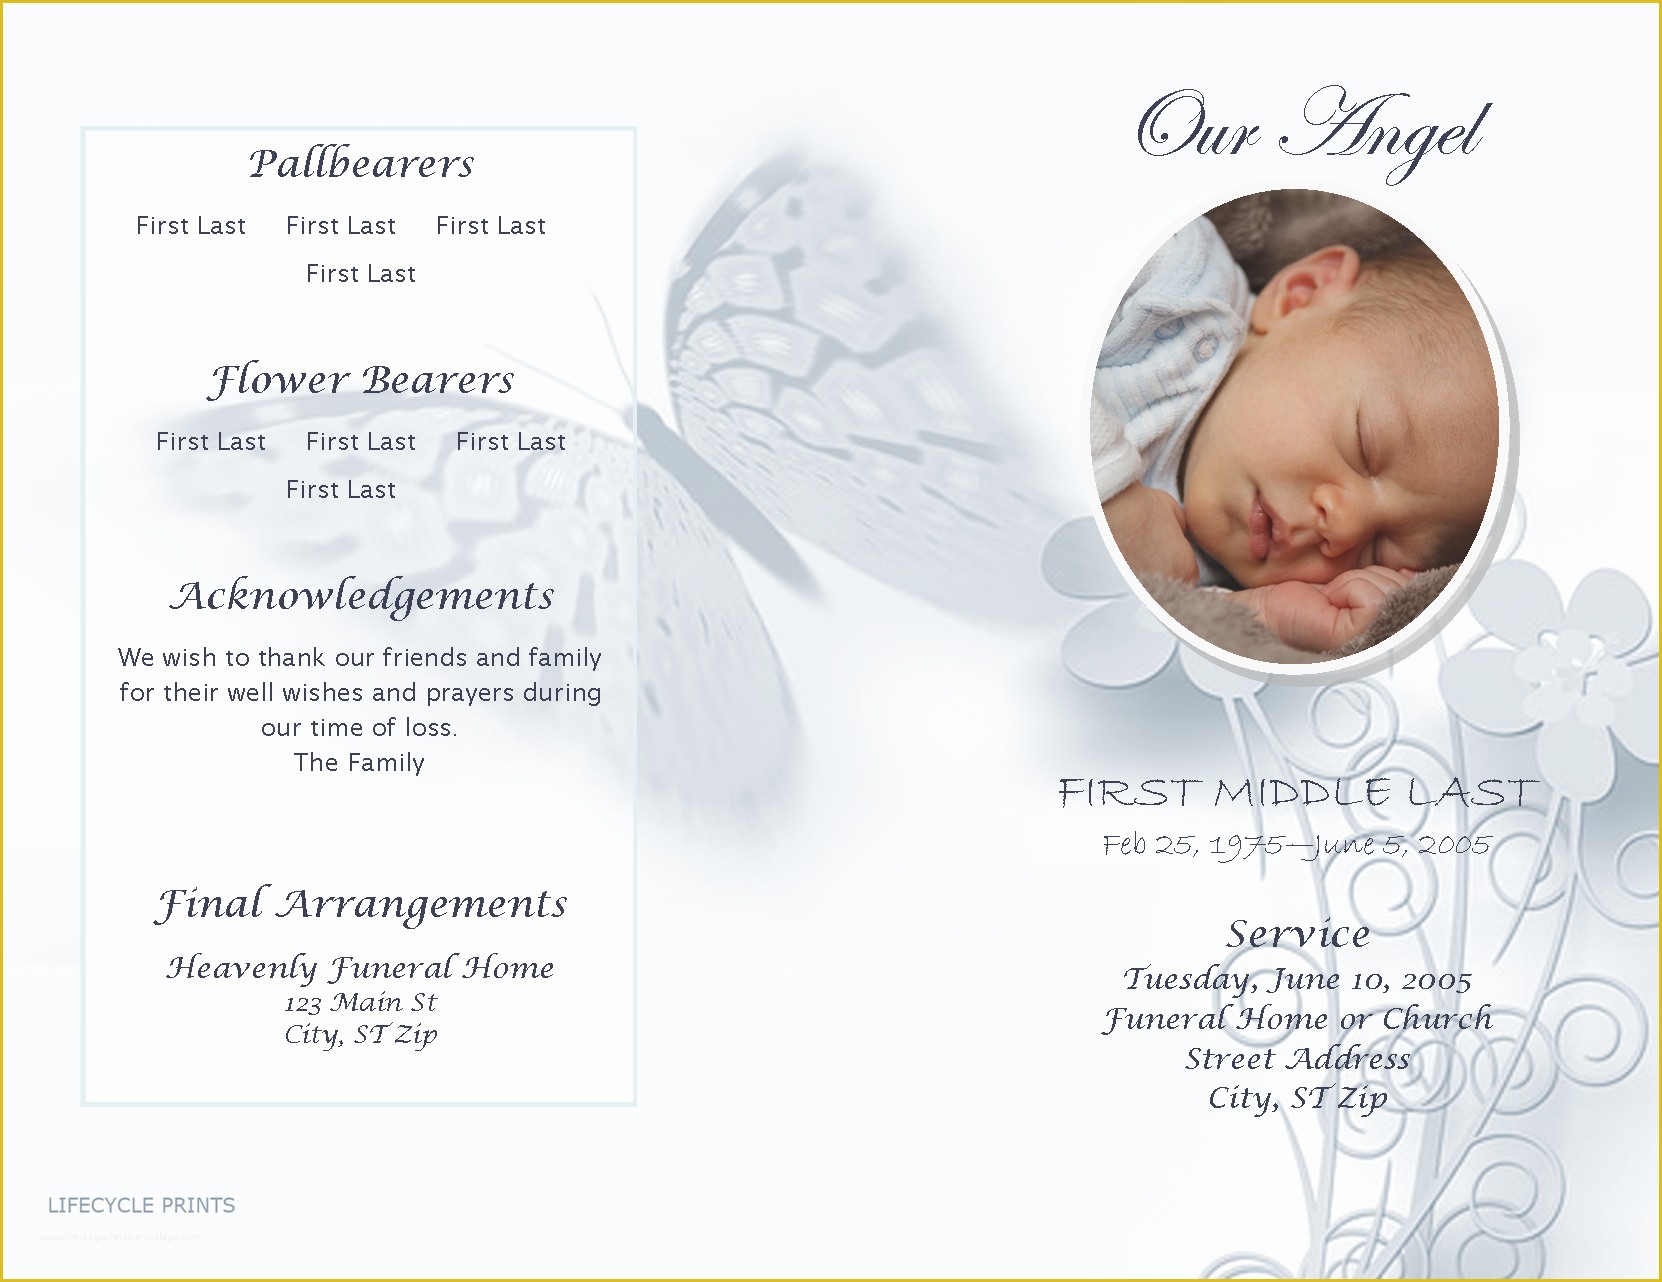 Free Homegoing Service Program Template Of Lifecycleprints Celebration Of Life & Funeral Program